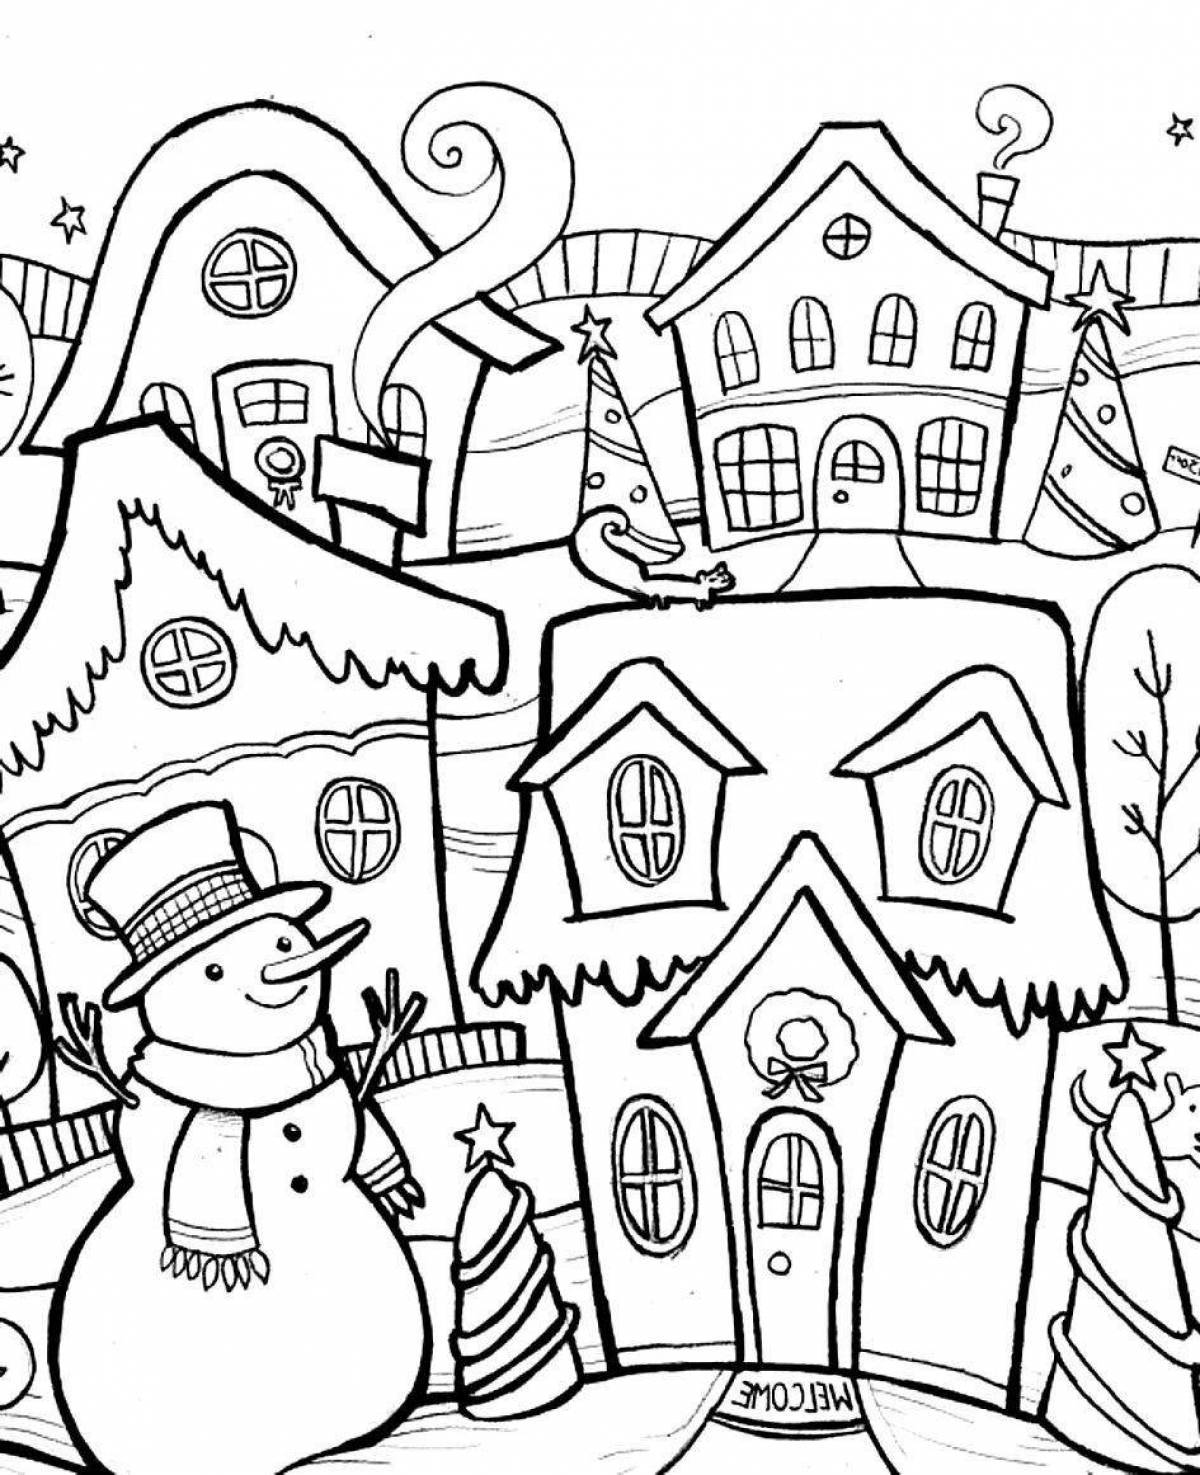 Charming city coloring book